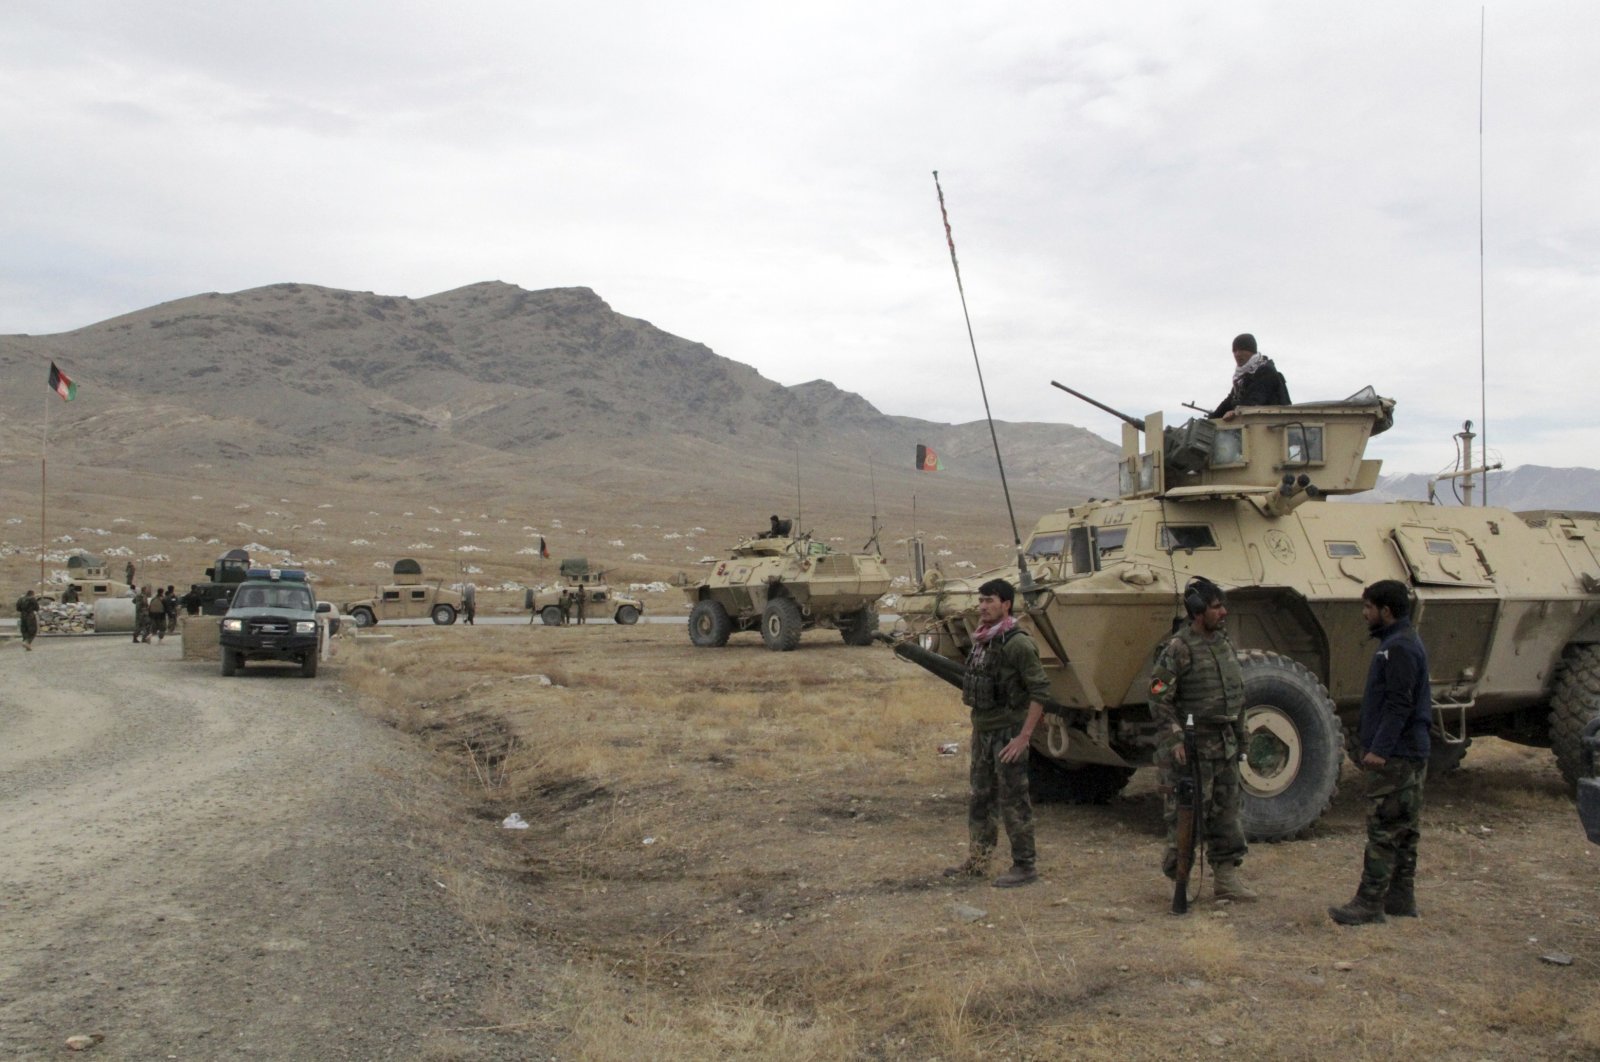 Afghan national army soldiers arrive at the site of a suicide bombing in Ghazni province west of Kabul, Nov. 29, 2020. (AP Photo)